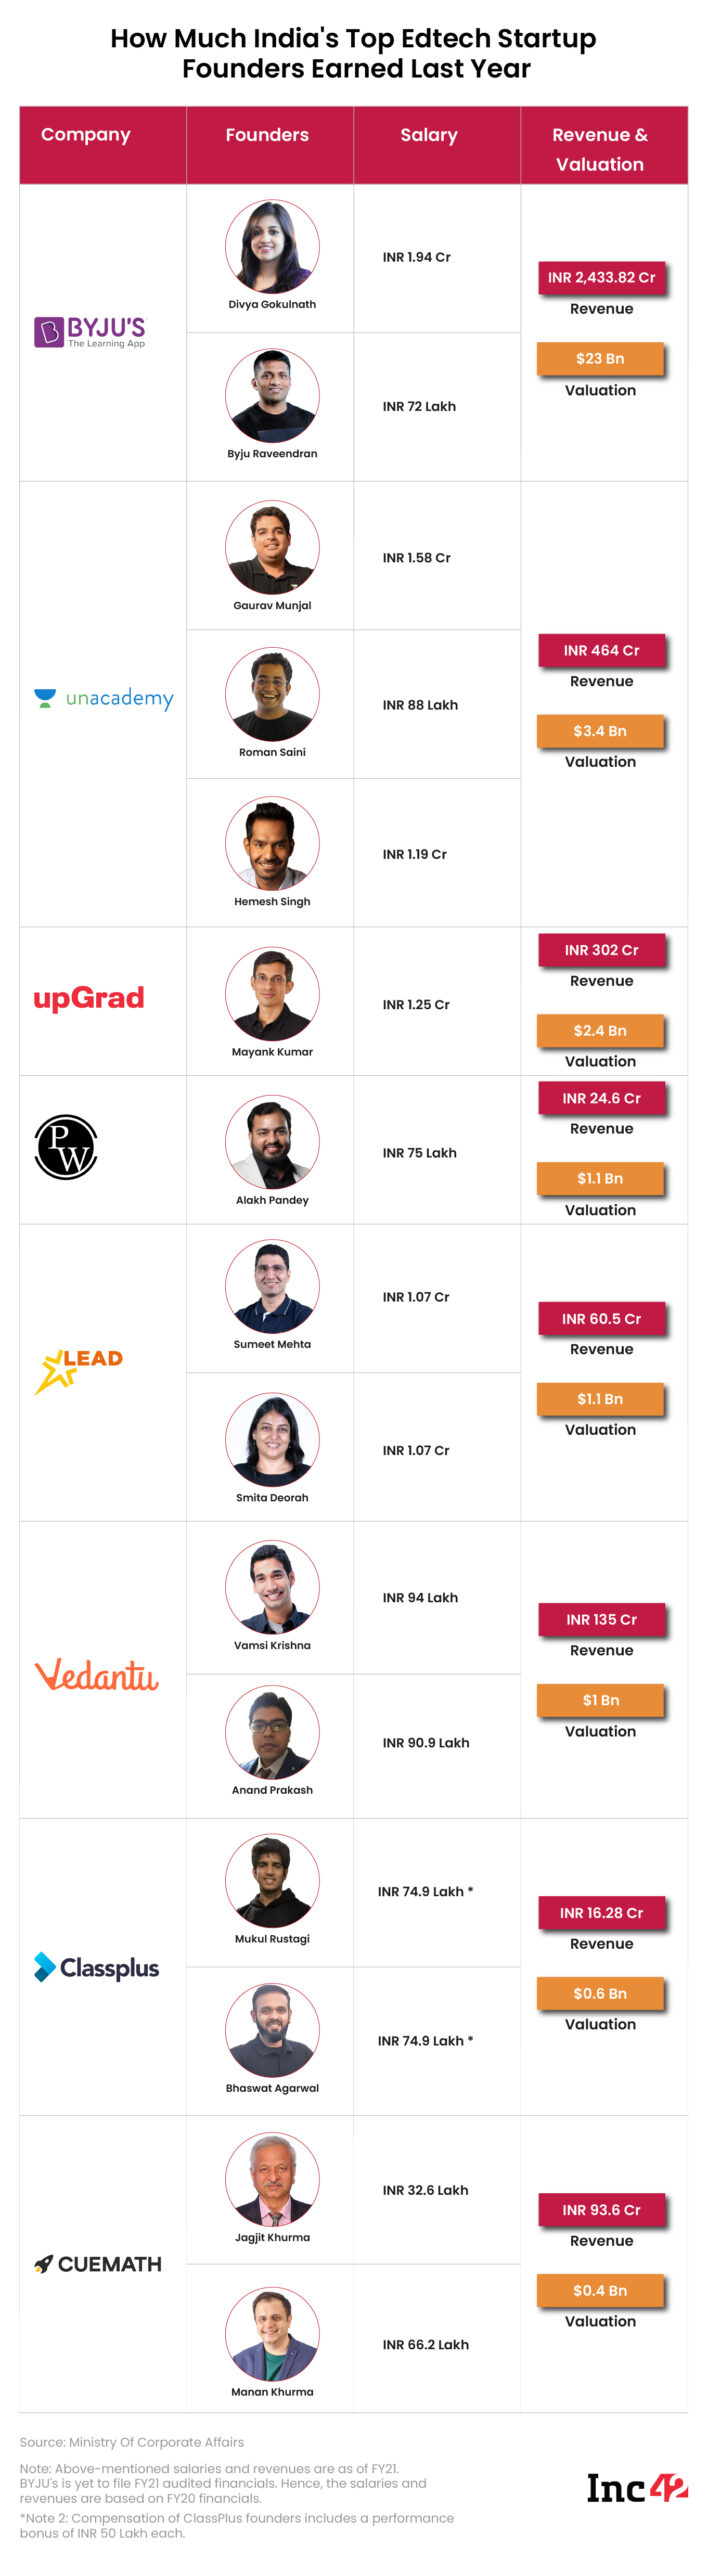 How Much Do India's Top Edtech Founders Get Paid?